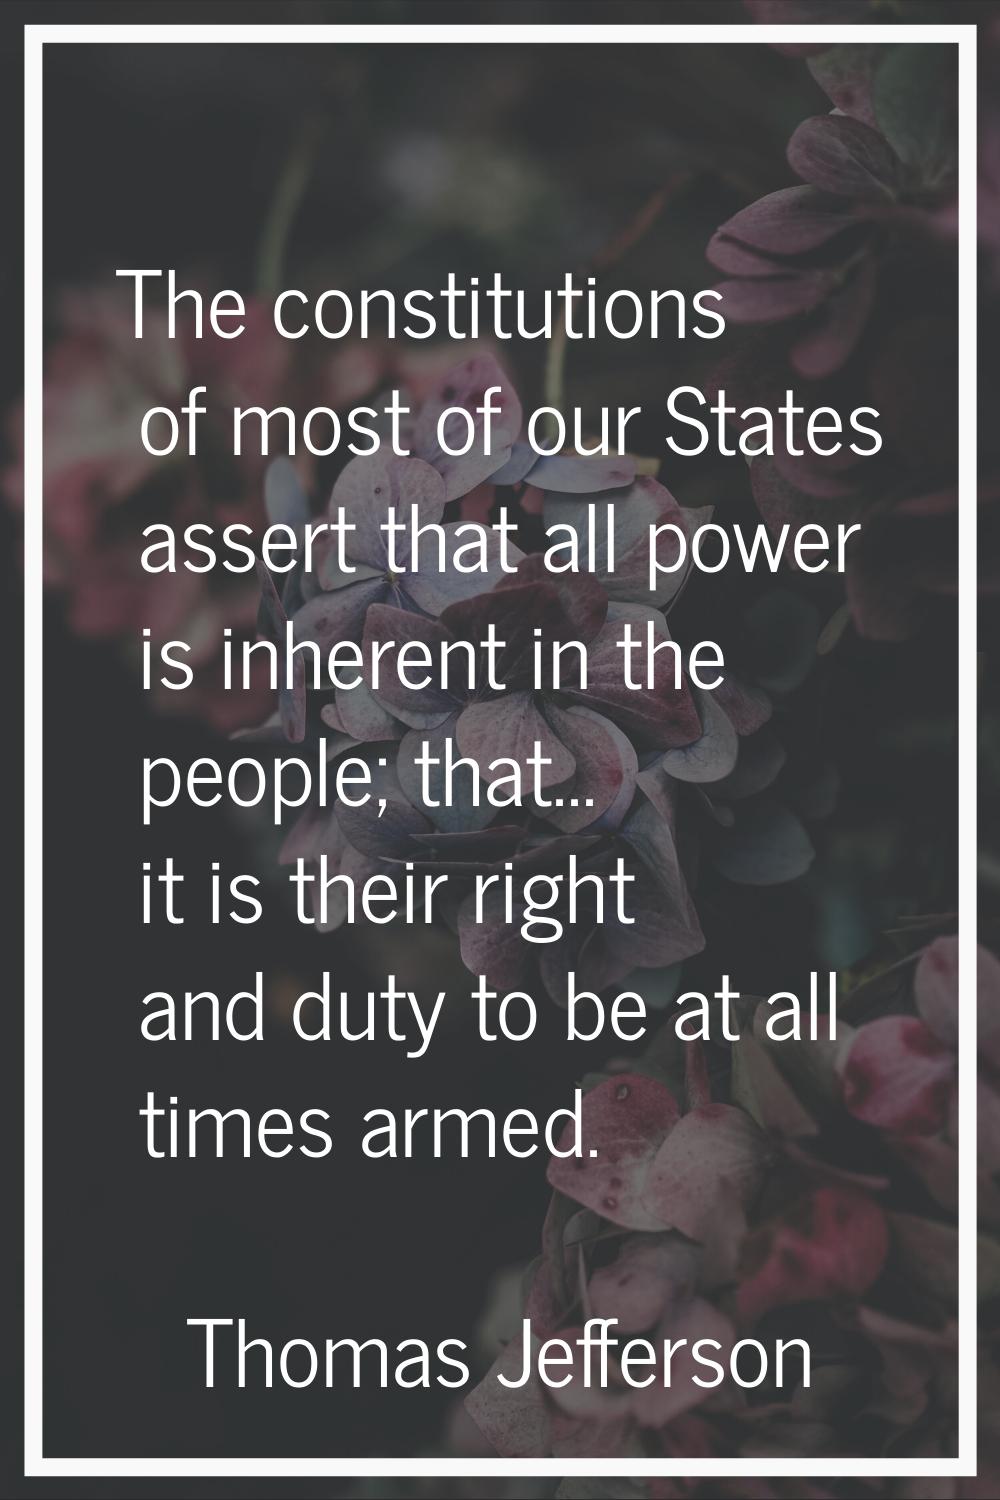 The constitutions of most of our States assert that all power is inherent in the people; that... it